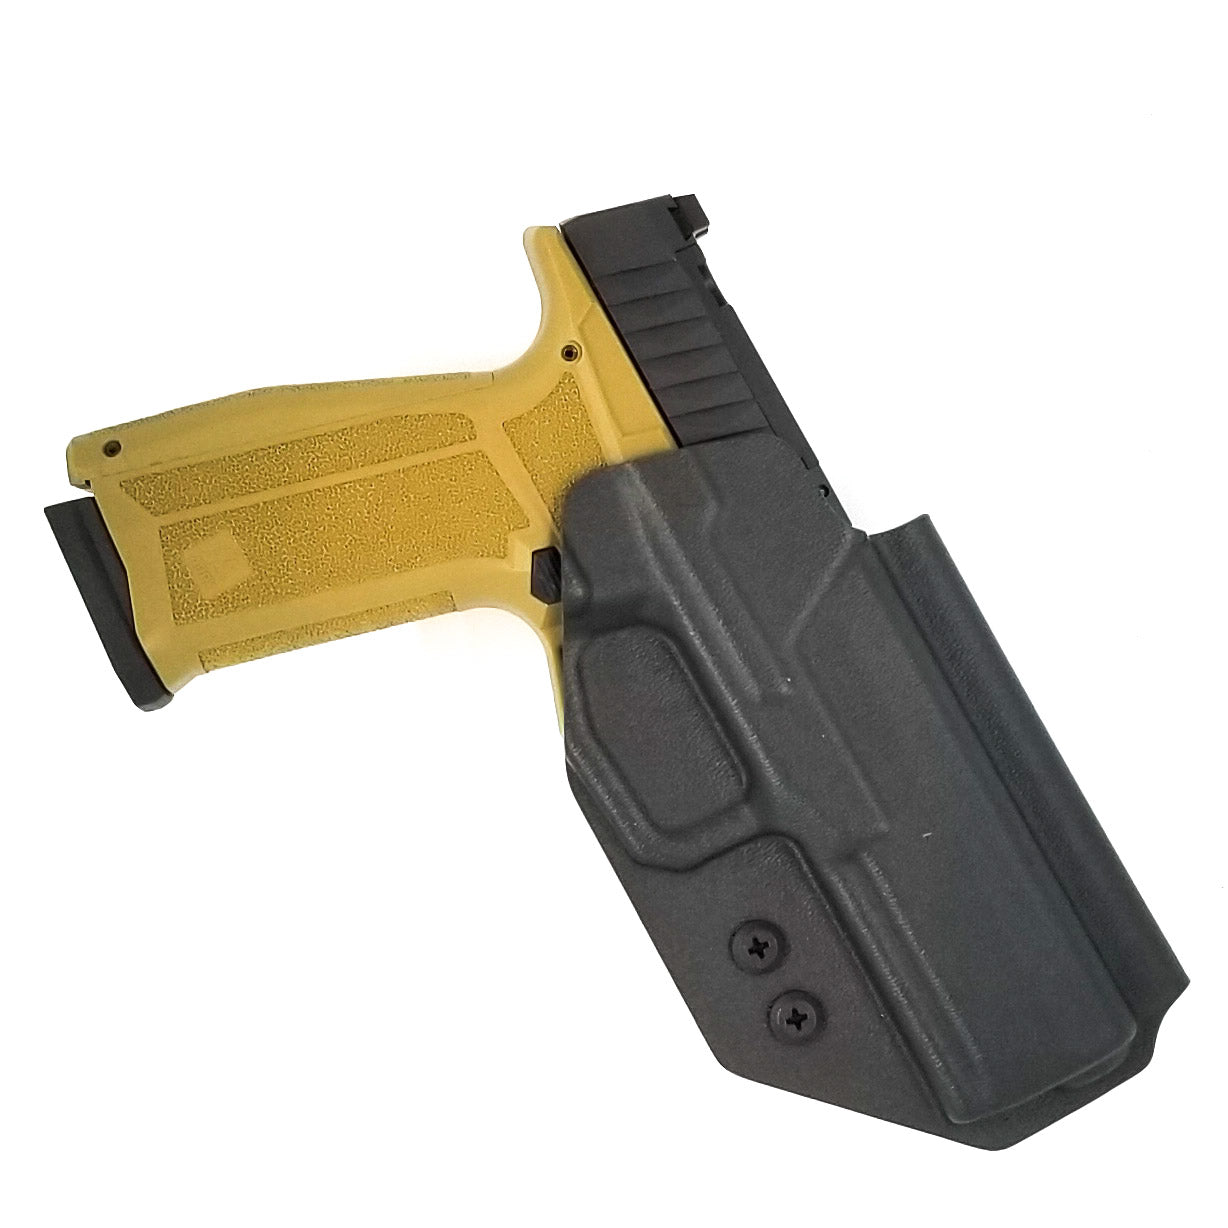 Outside Waistband holster designed to fit the Arex Delta L, Delta M and Delta X pistol Adjustable retention Holster profile cut for red dot and RMR sights Comes with Blade-Tech Tek-Lok Belt Attachment Made from .080" thick thermoplastic for durability High sweat shield standard, medium and low sweat shield height avail…